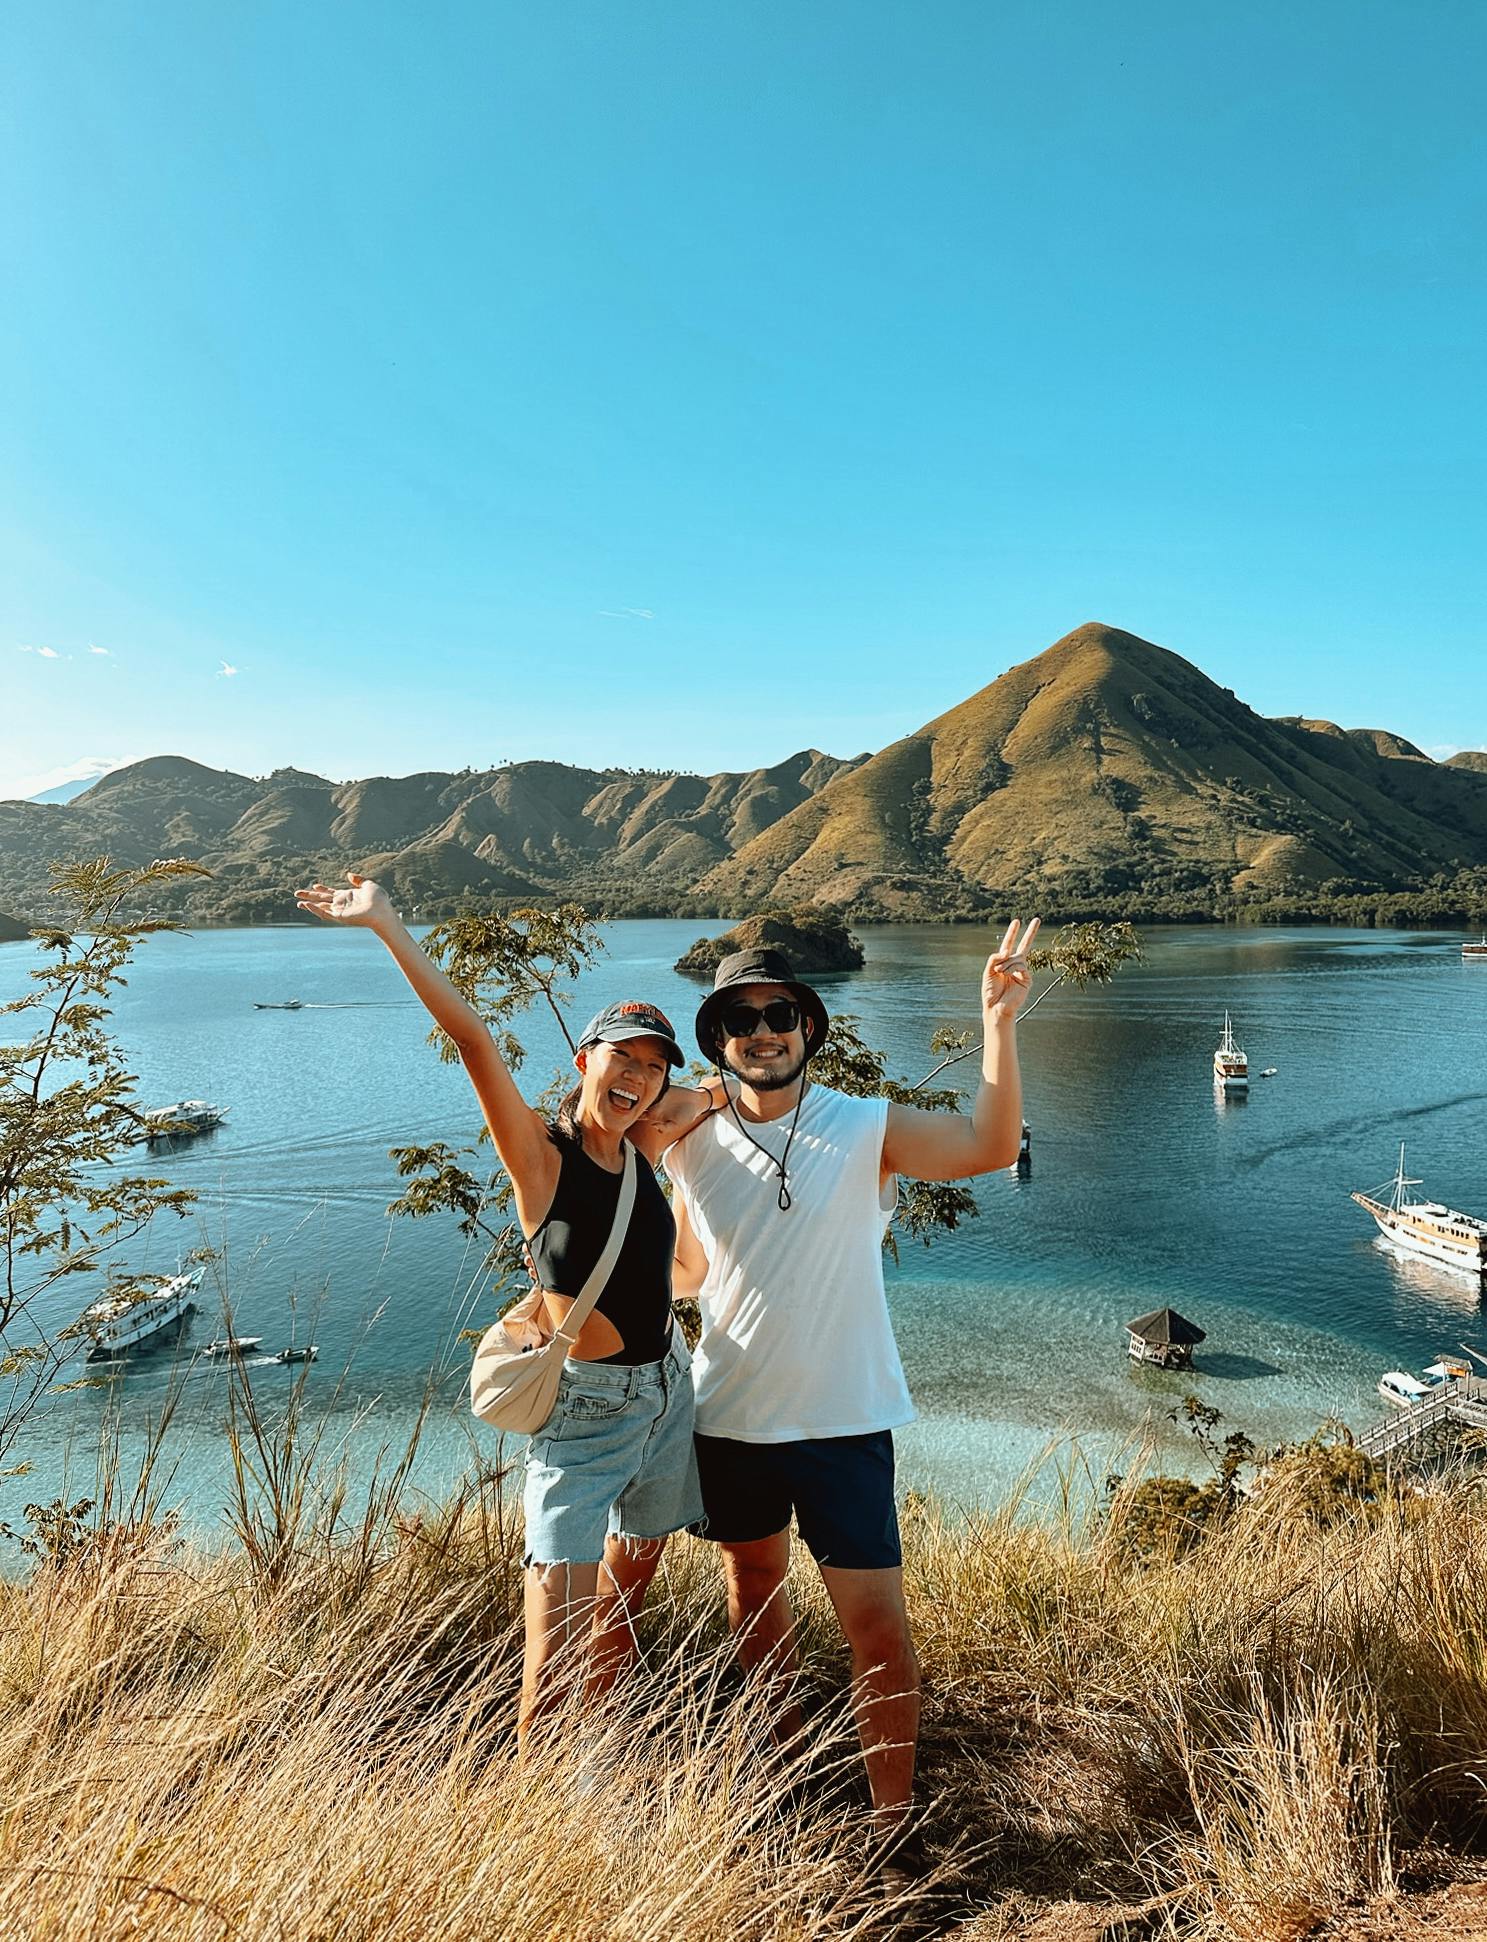 Your Cheat Sheet to Planning a Trip to Komodo Islands